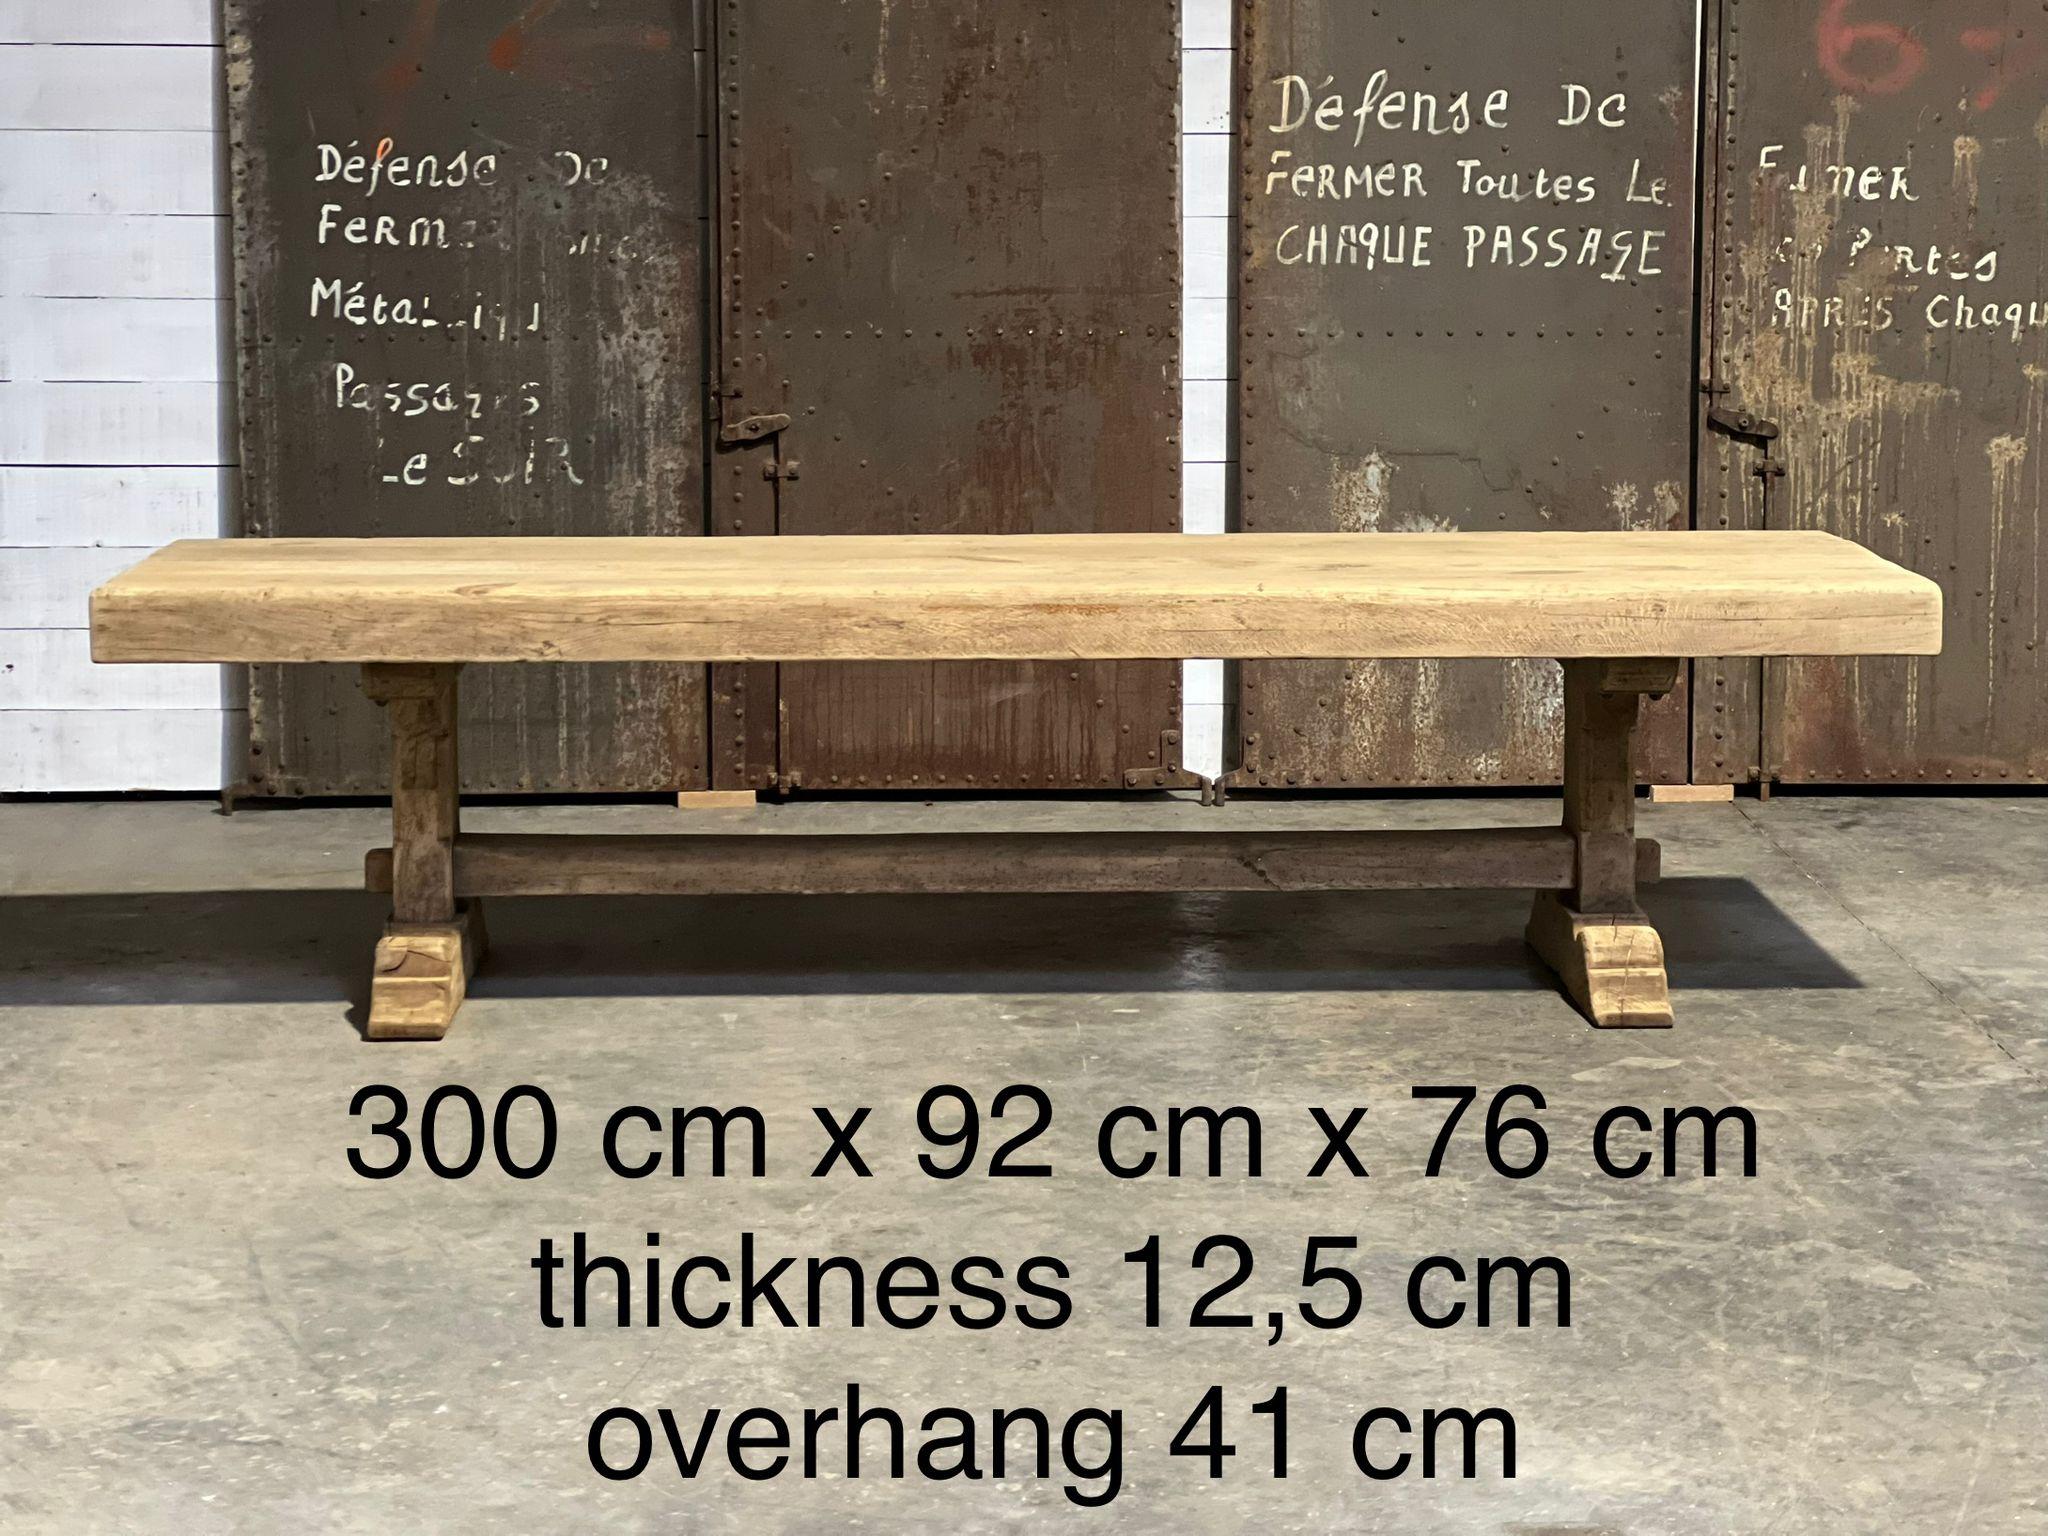 We are extremely pleased to offer what is probably the best Farmhouse Dining Table we have had for many years. 
Not only is it a 3 Meter Table but the Top is an incredible 12.5 cm thick and weighs a tonne. We have never seen a top this thick